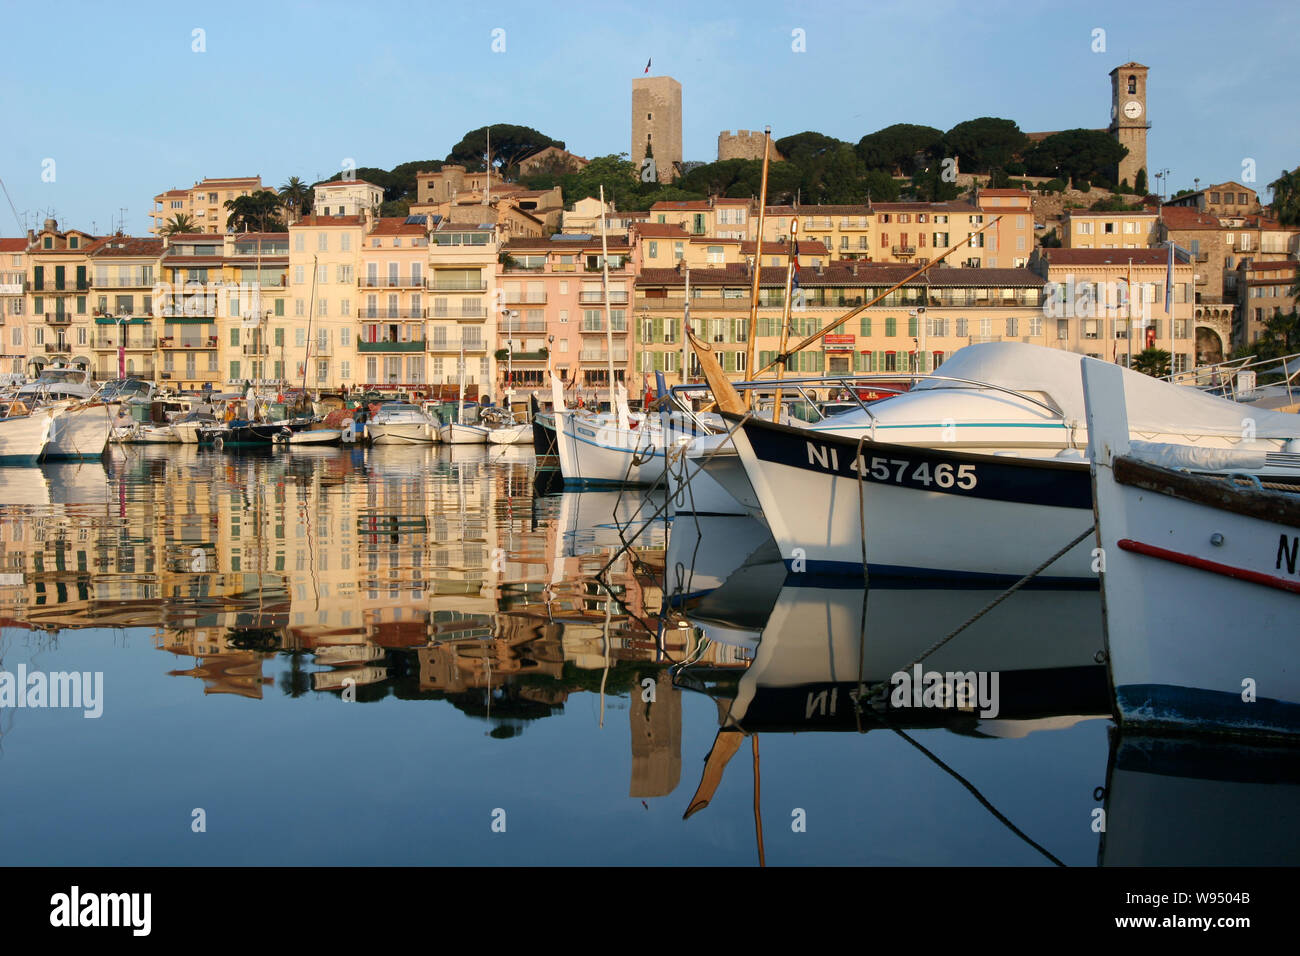 Cannes Port with fishing boats and view of Le Suquet Hill, Cannes France Stock Photo